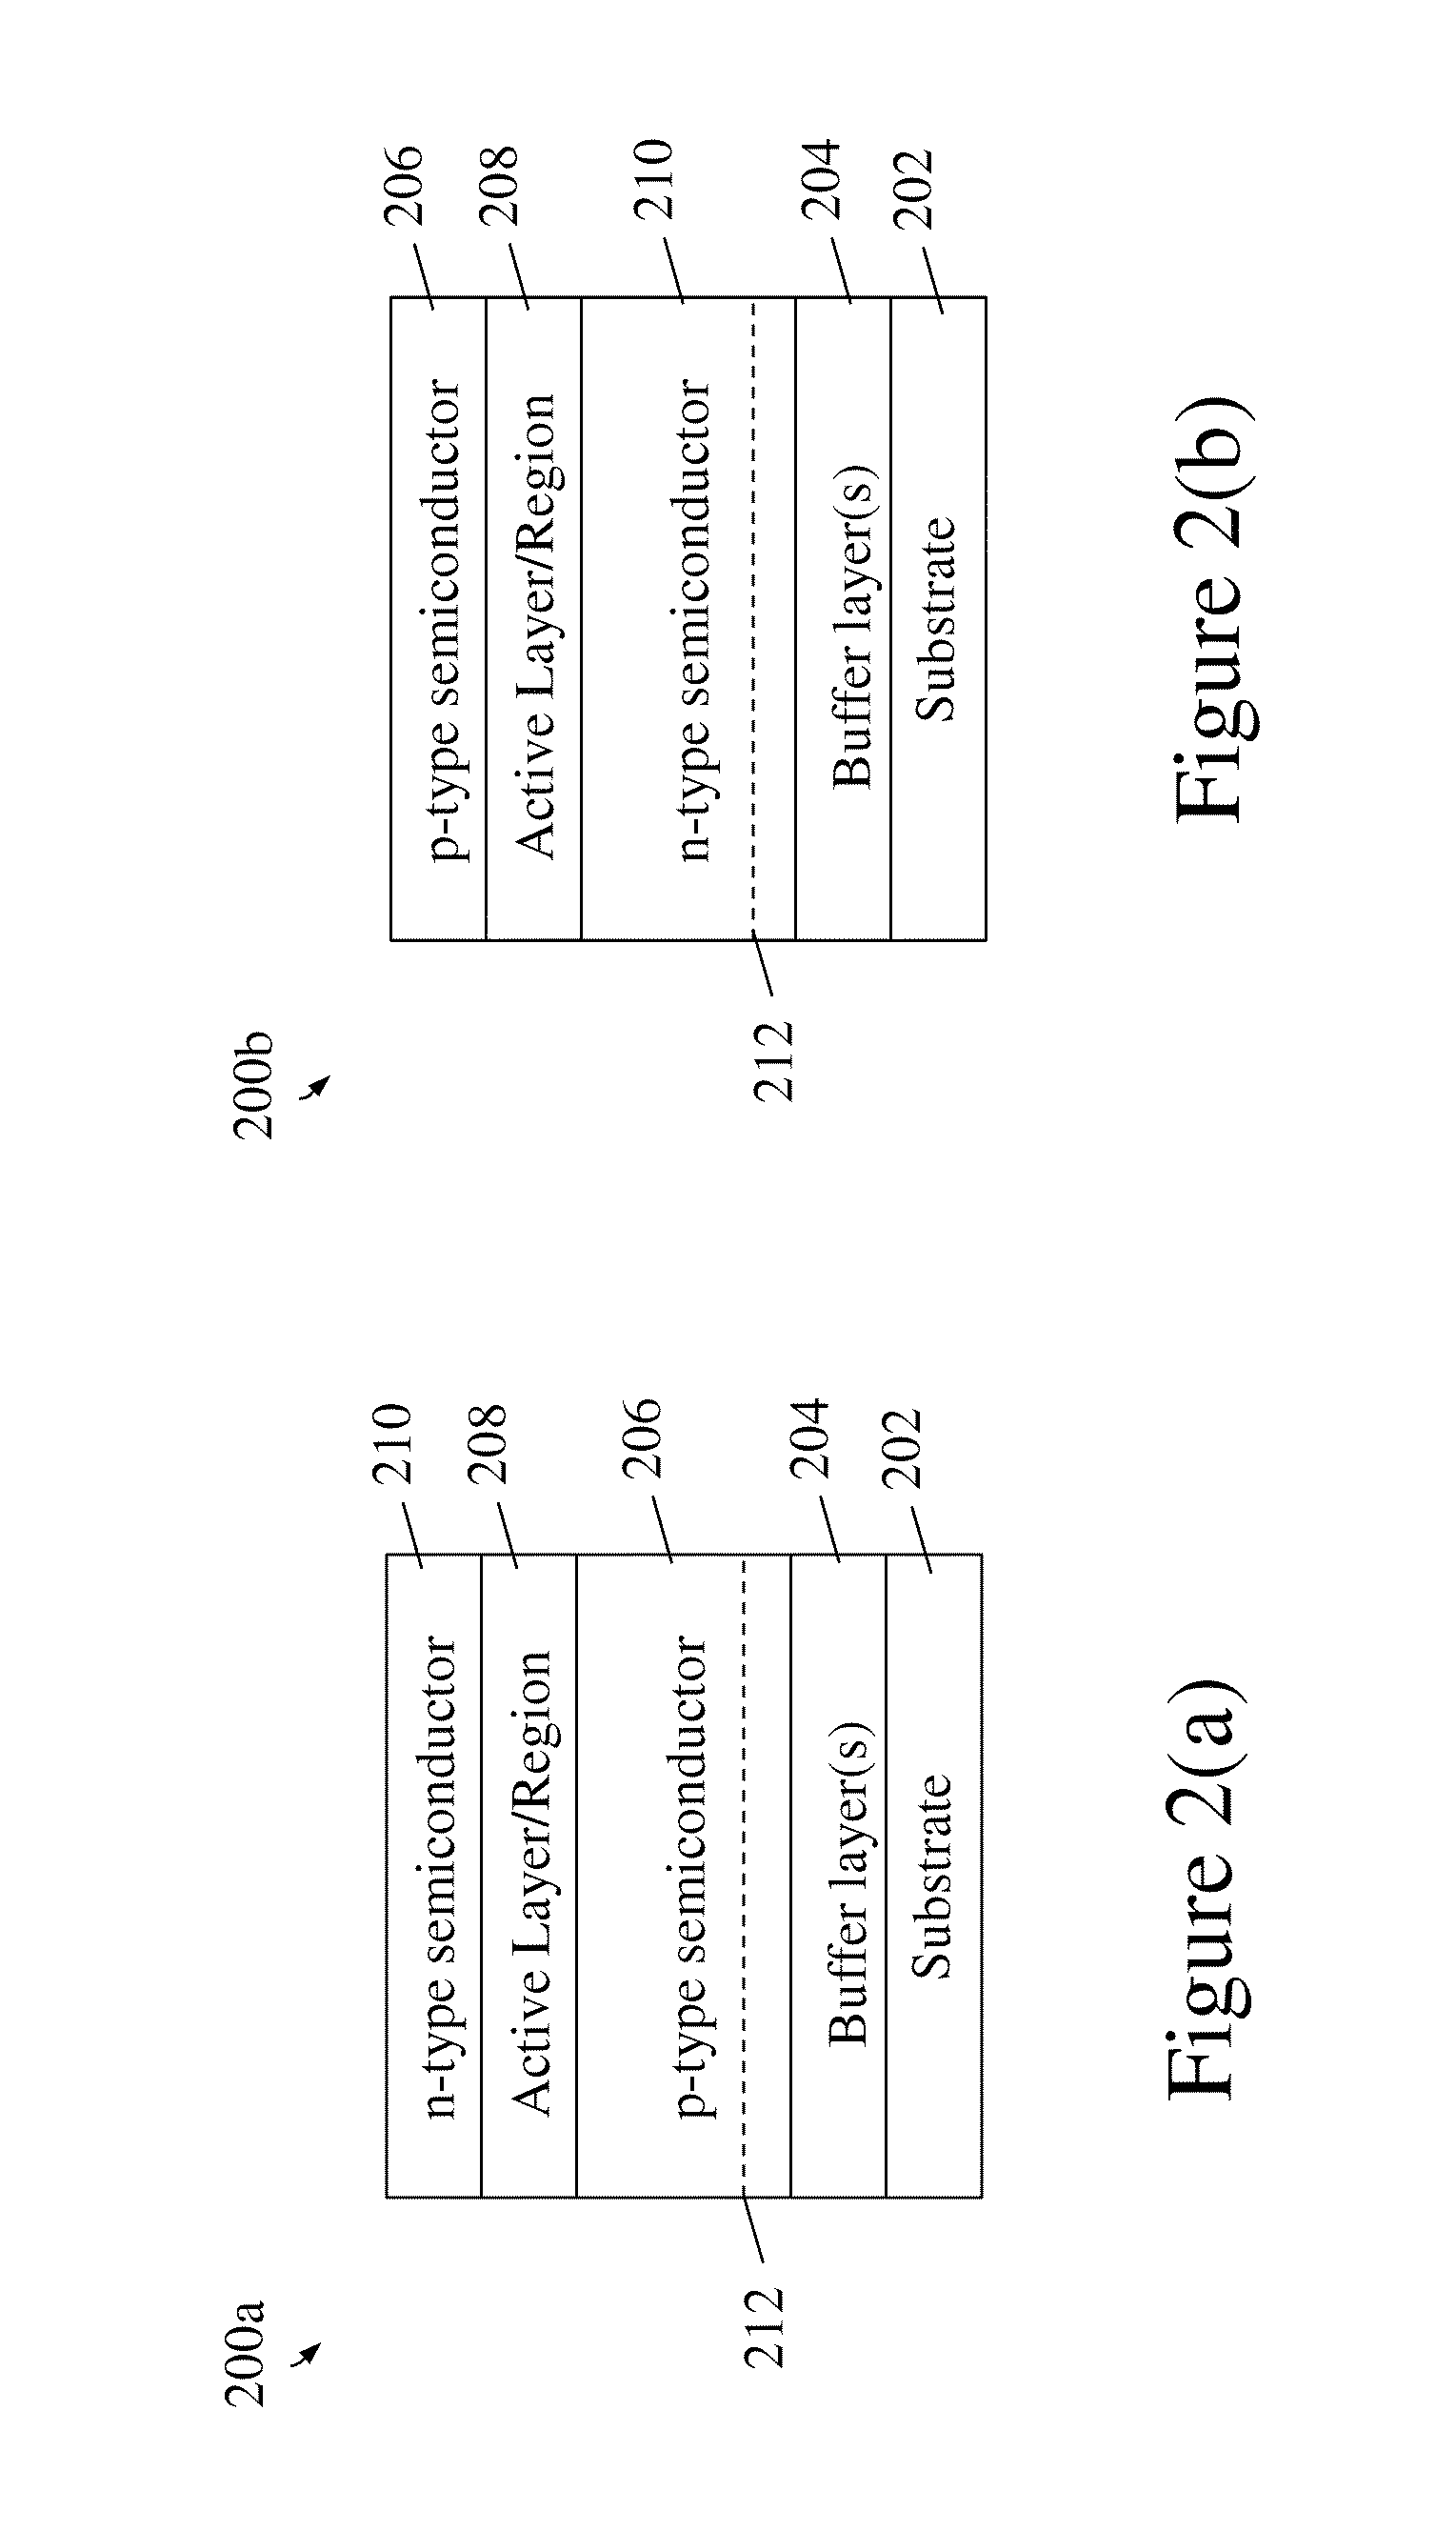 Integrating active matrix inorganic light emitting diodes for display devices